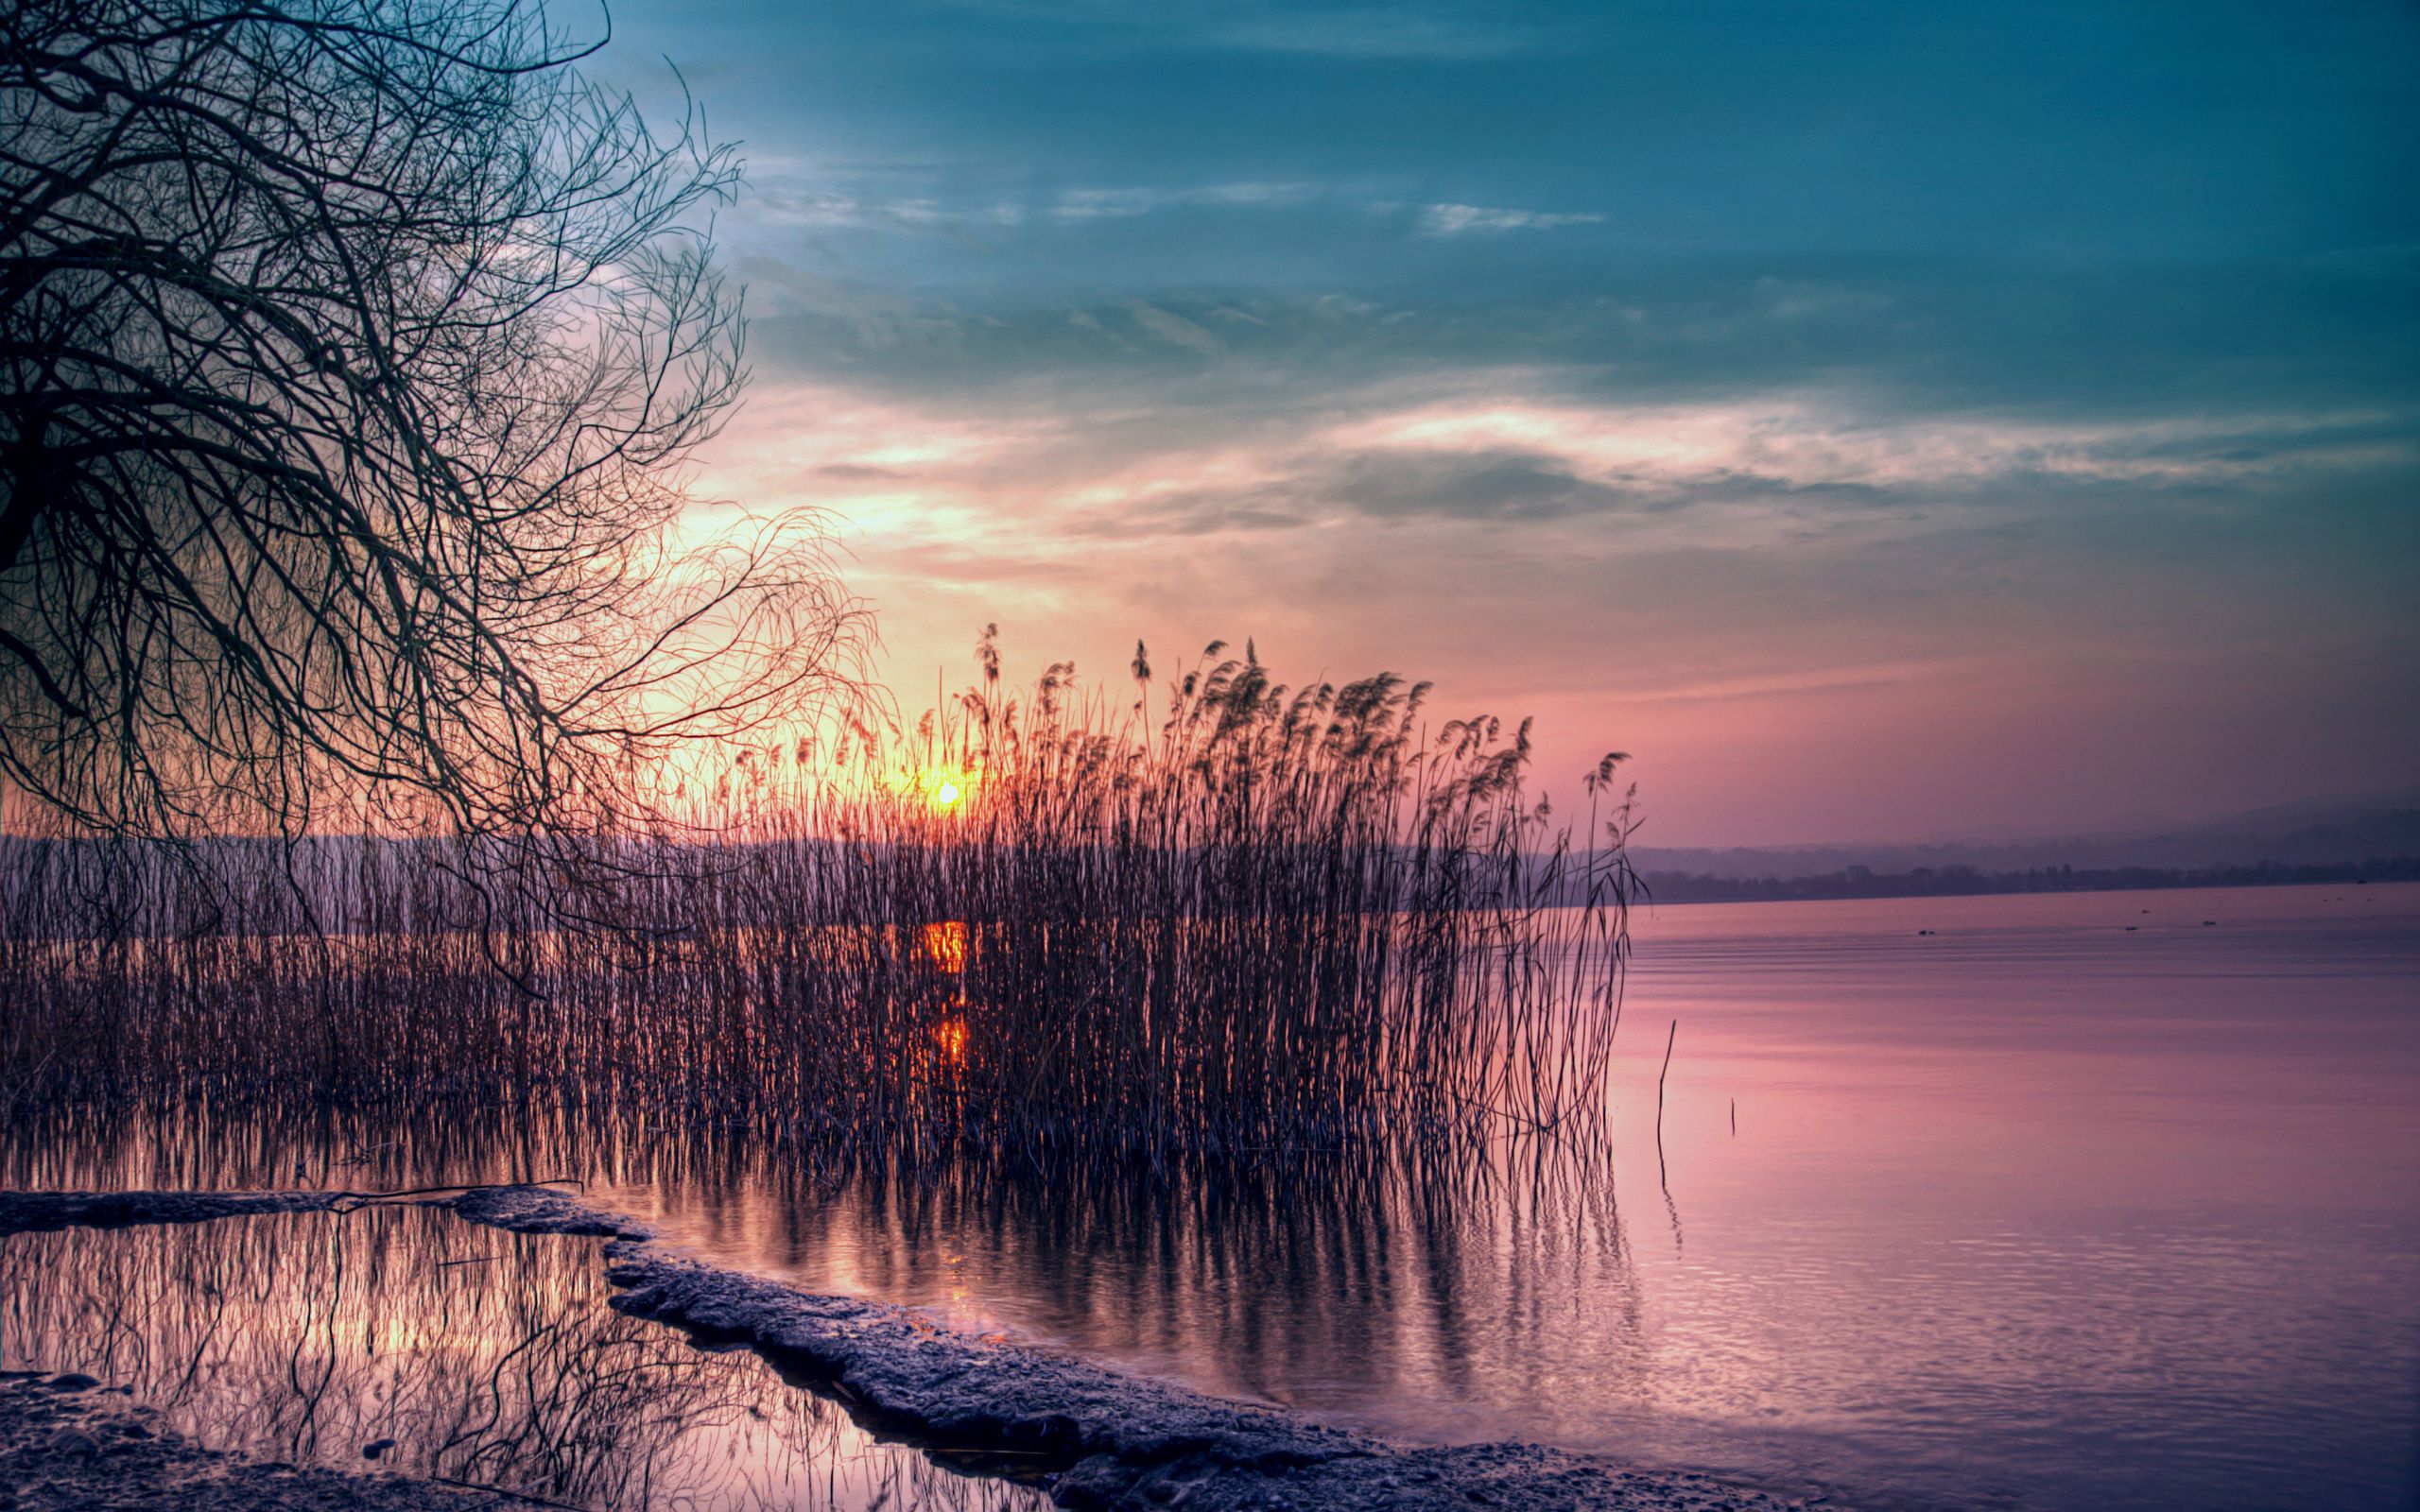 shore, bank, nature, water, sunset, wood, tree, branches, branch, evening, basin, cane, reed, willow cellphone